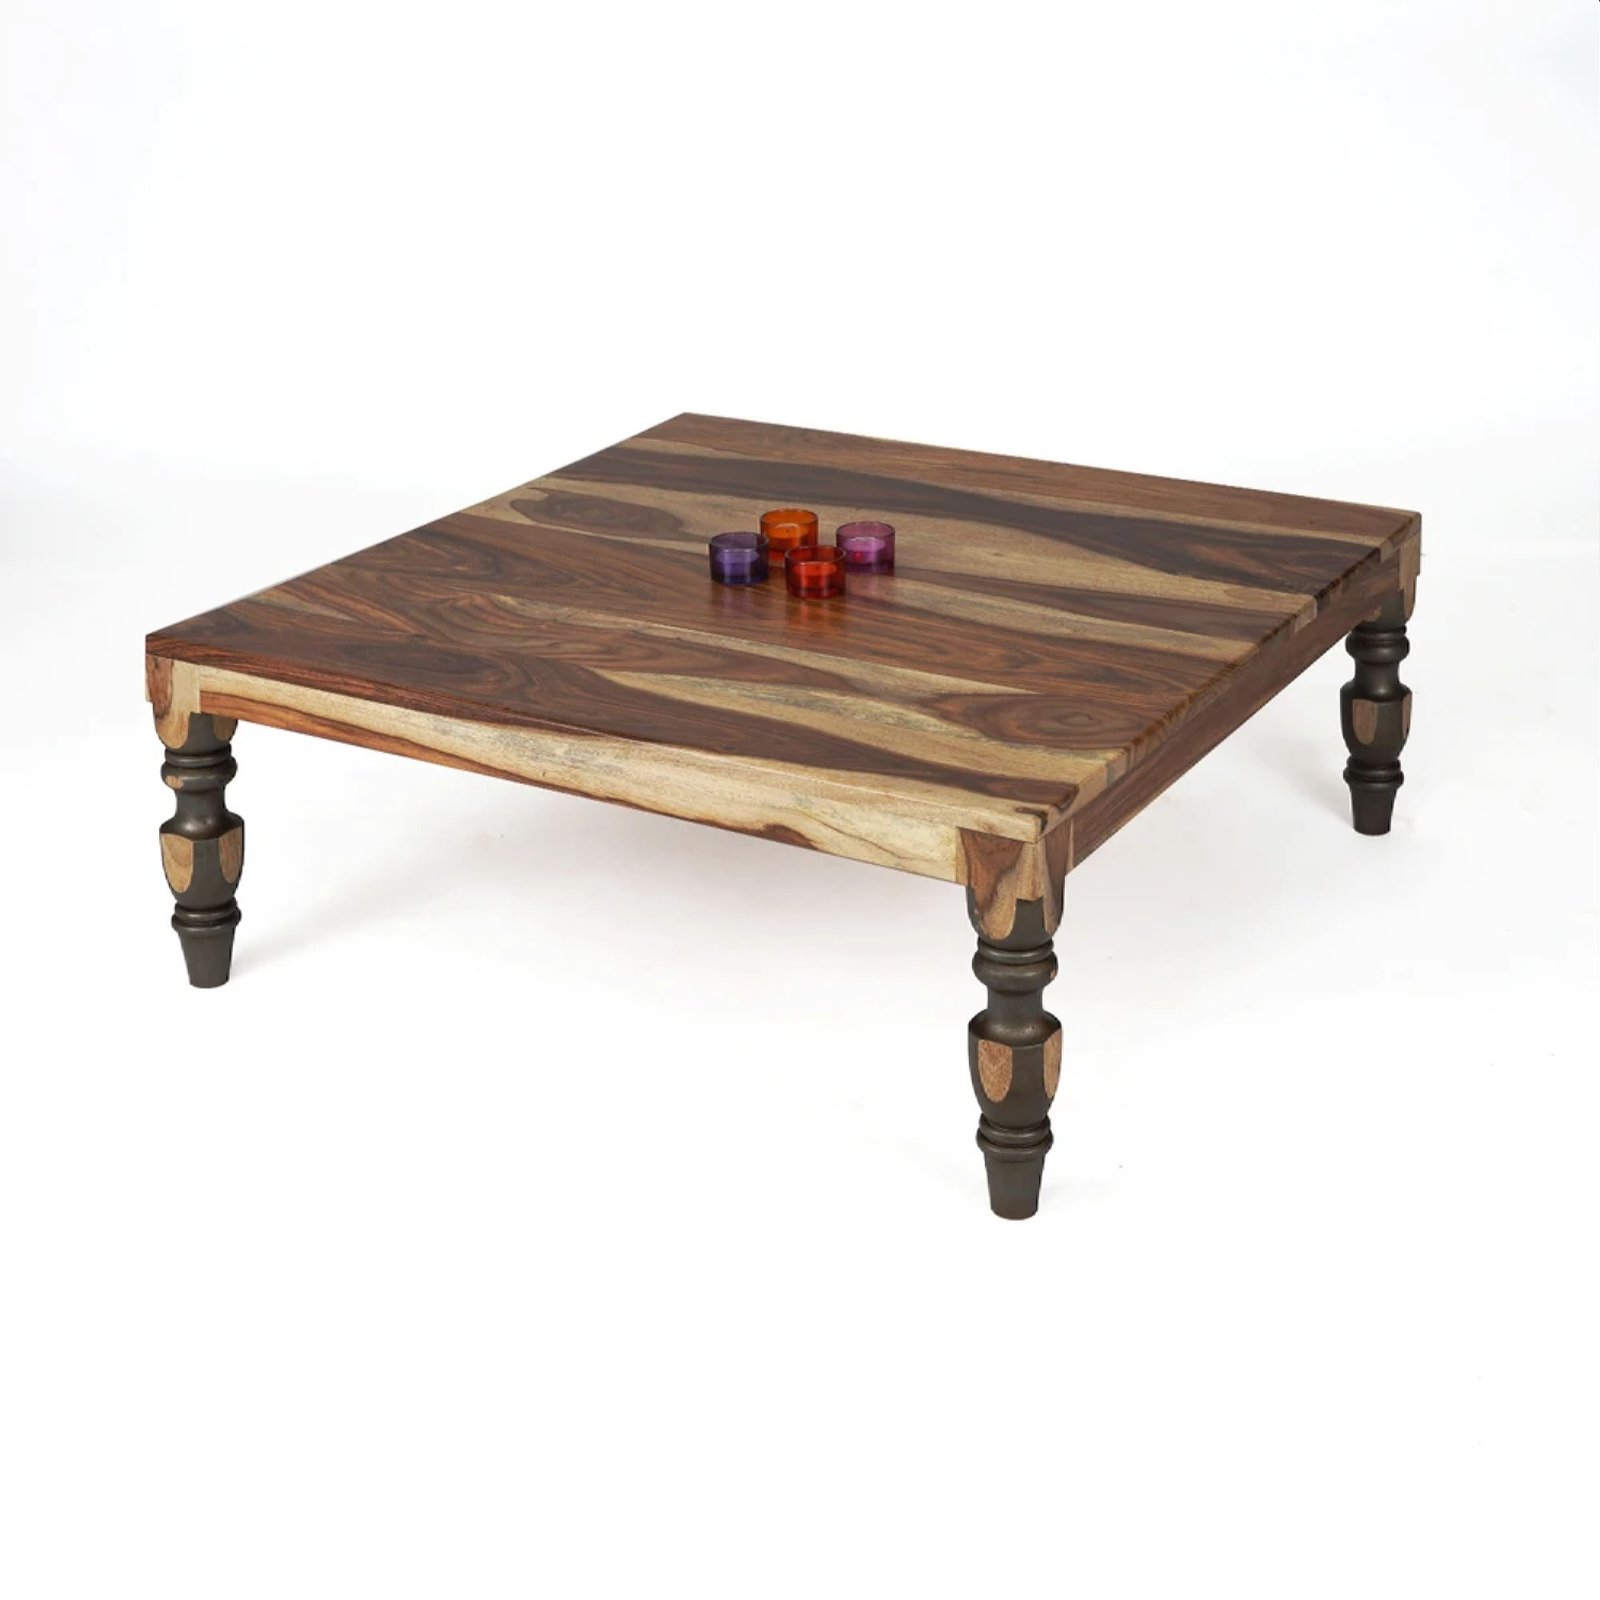 Small Wooden Coffee Table